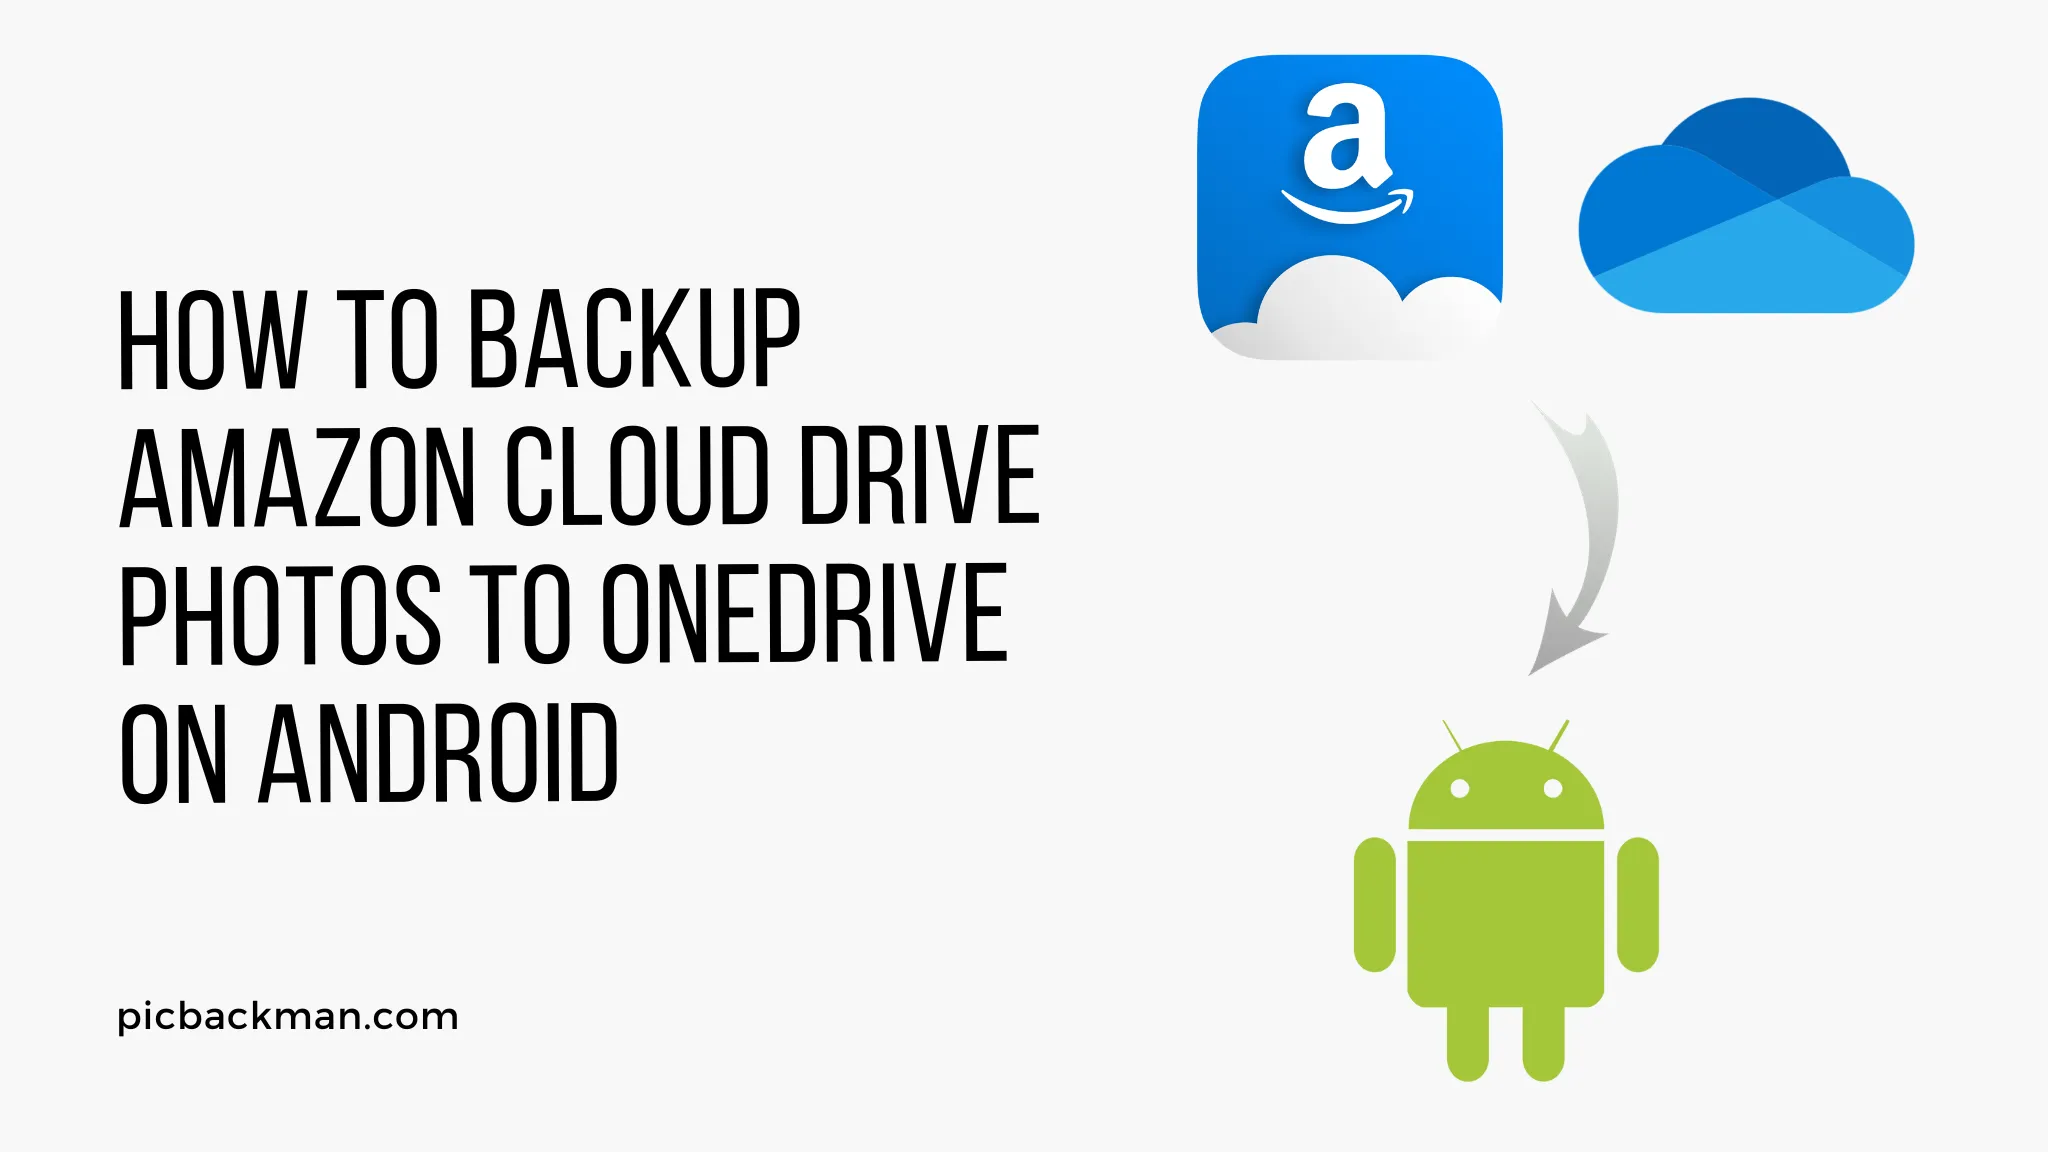 How to Backup Amazon Cloud Drive Photos to OneDrive on Android?